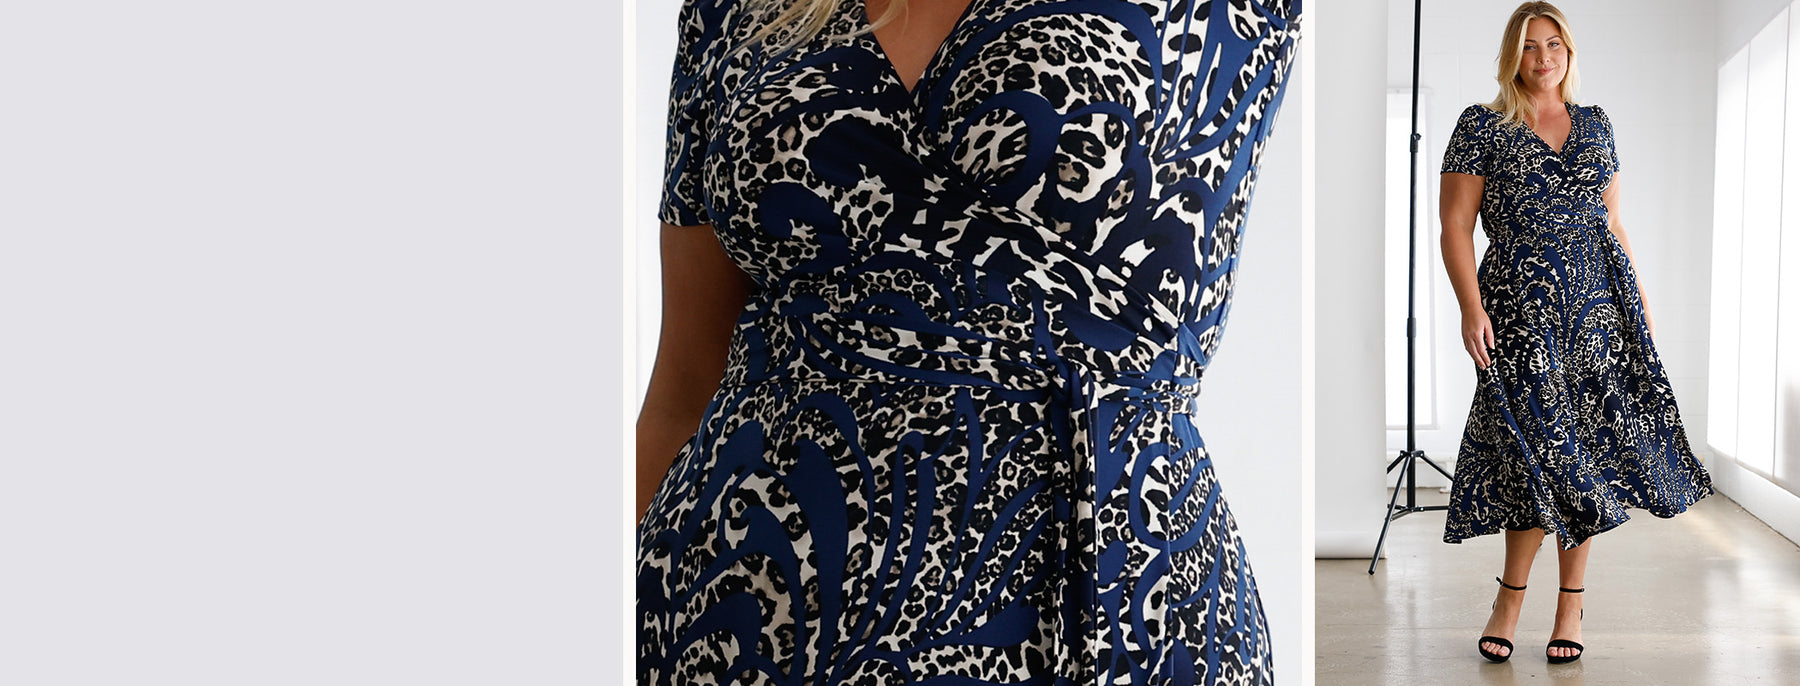 Wrap dresses make great investment pieces, especially wrap dresses by Australian fashion brand, Leina & Fleur. An animal print and blue swirl print wrap dress is shown in detail and full length to show the quality design features of L&F's made in Australia wrap dresses.